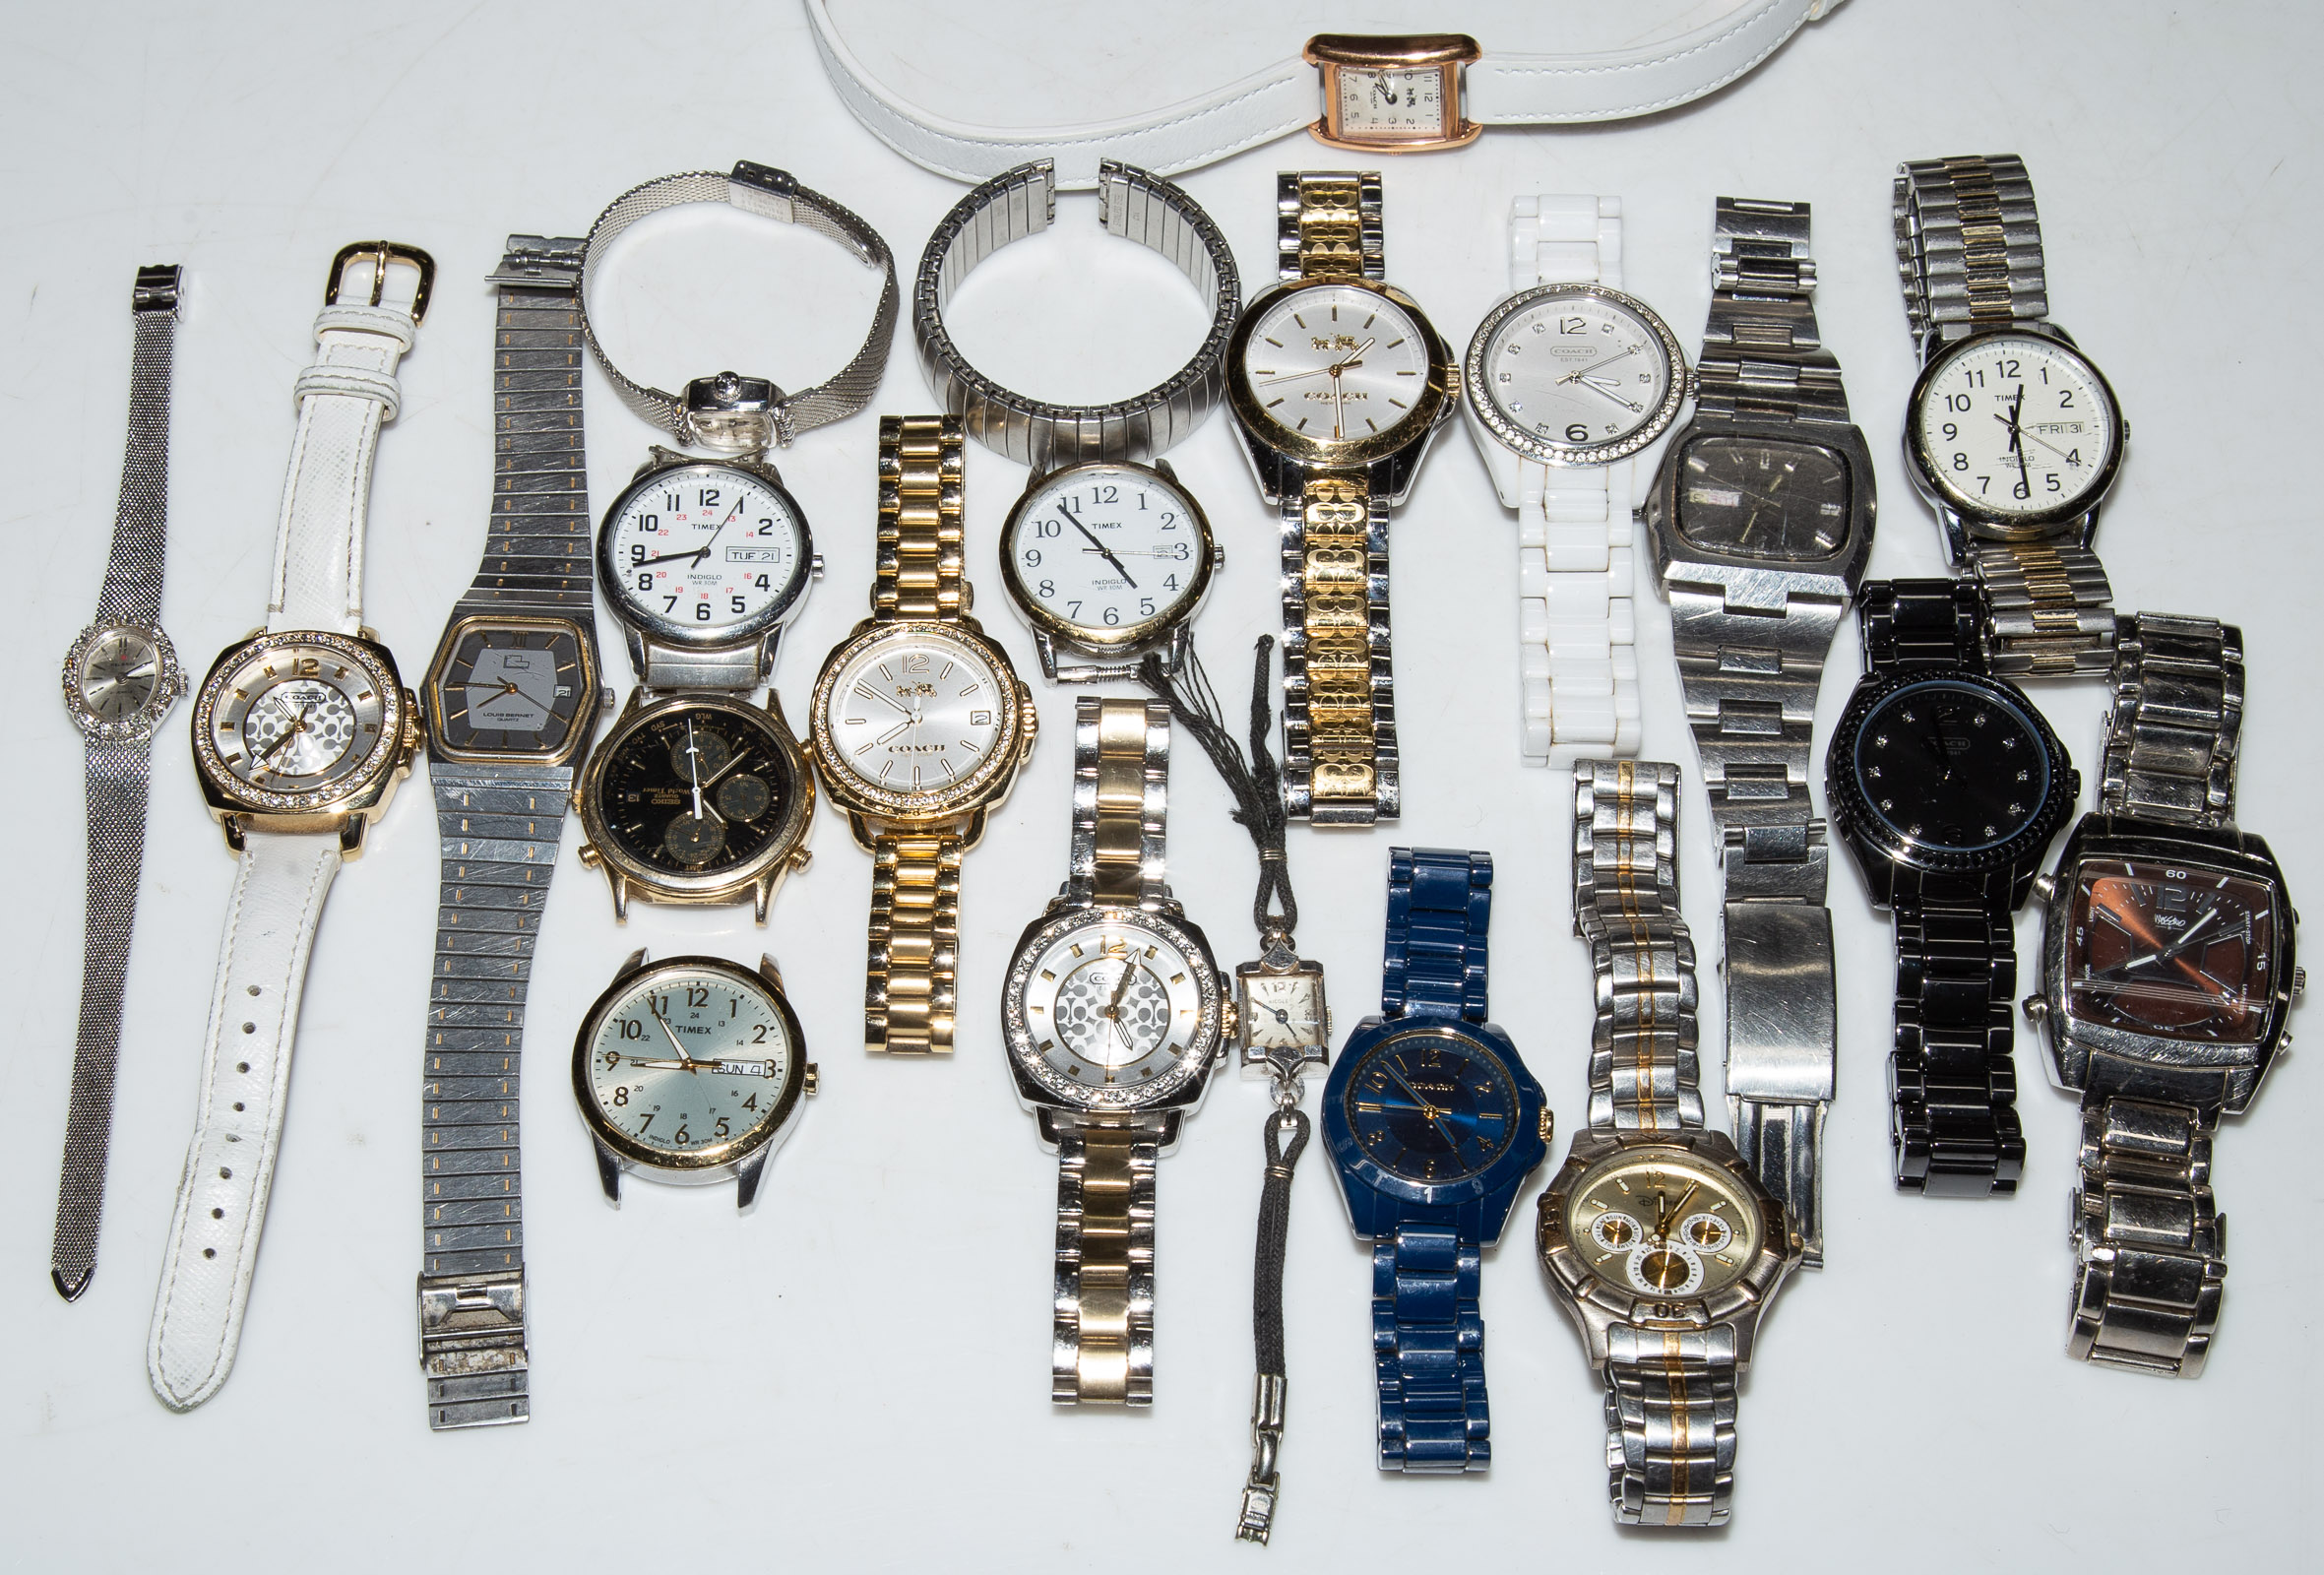 A LARGE COLLECTION OF FASHION WATCHES 310662